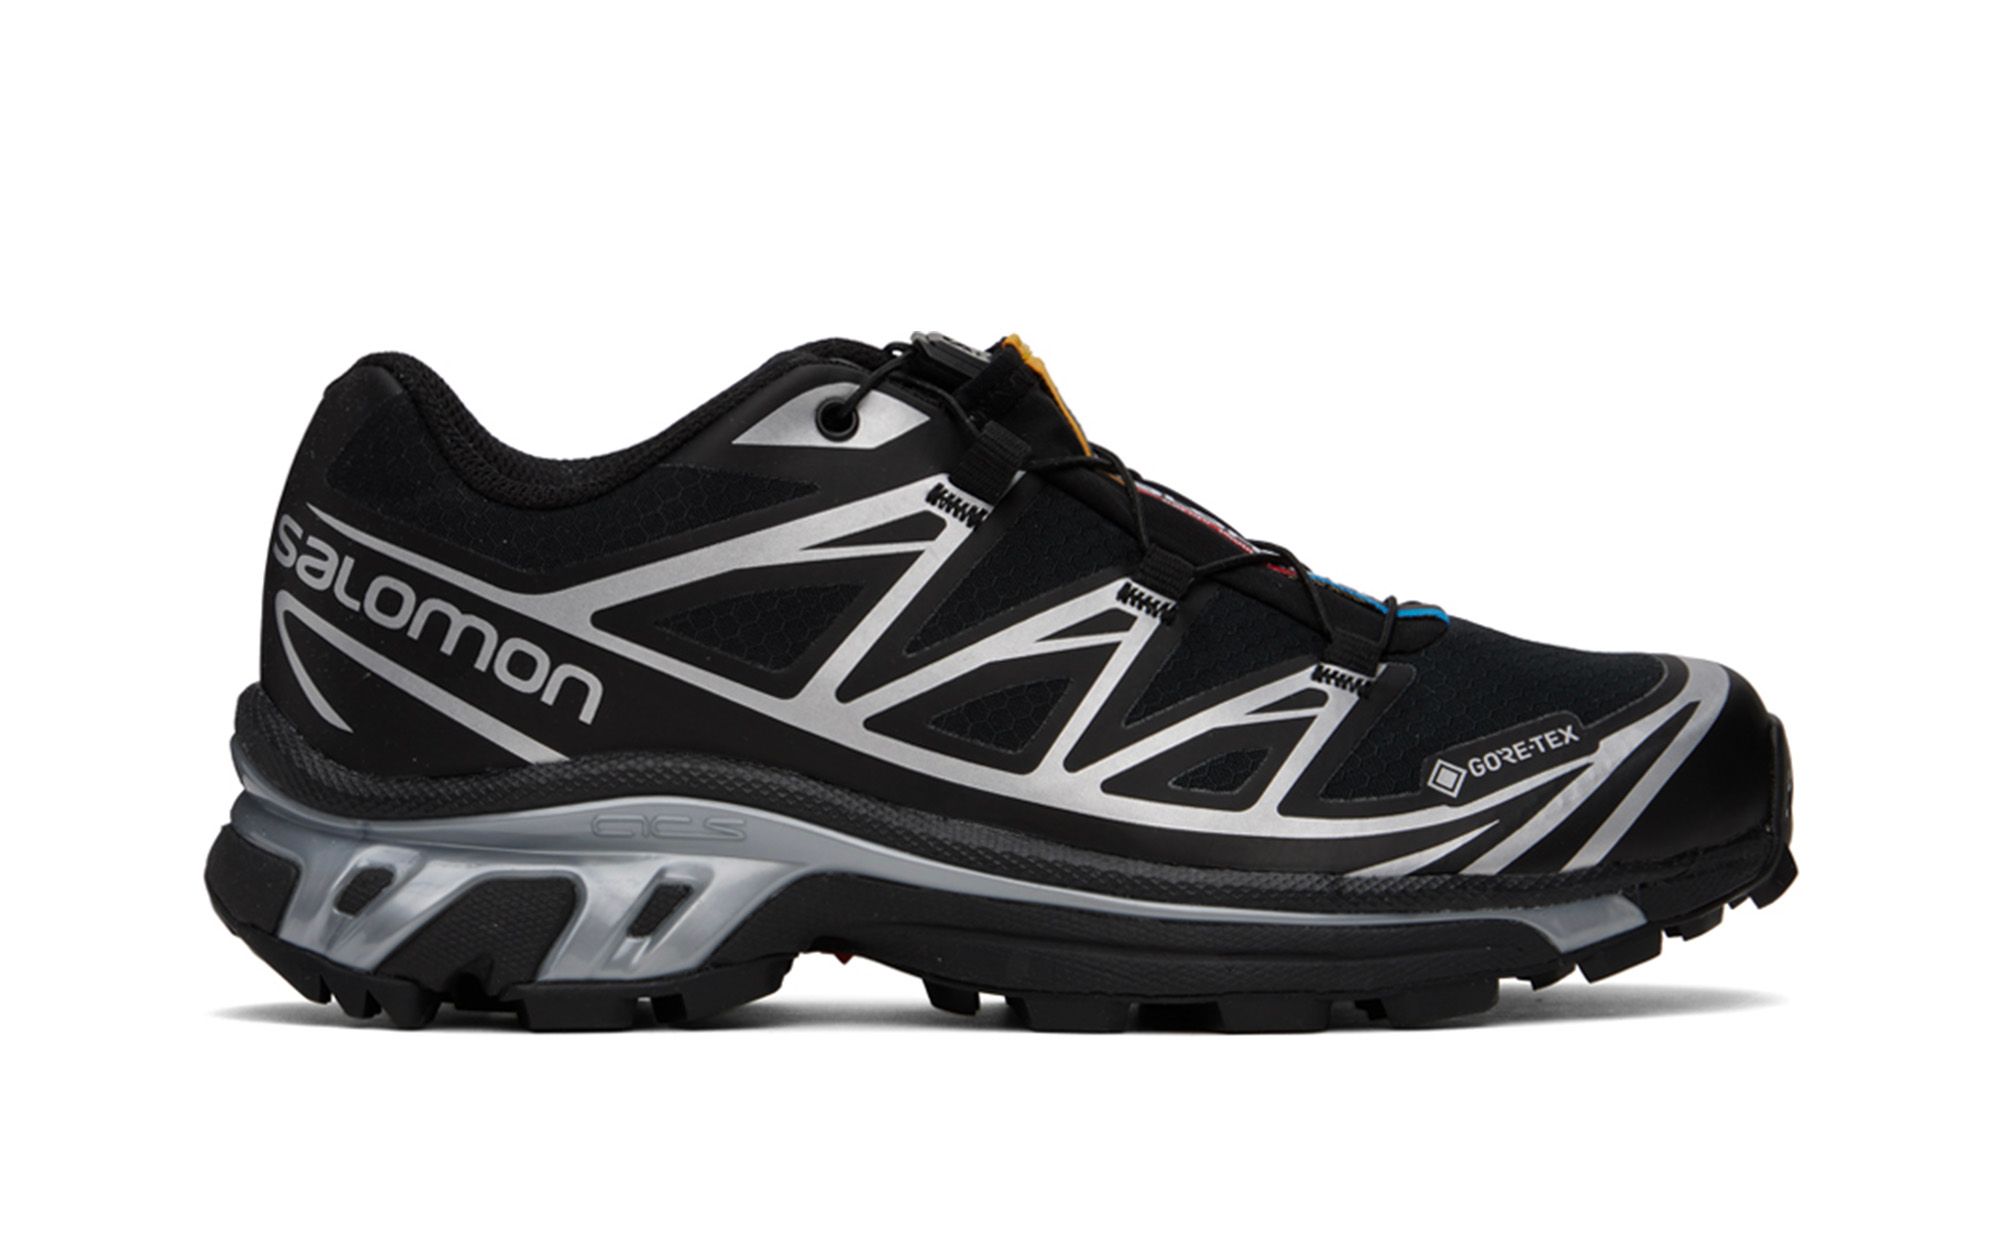 The Salomon XT-6 GORE-TEX Surfaces in Black and Silver | House 